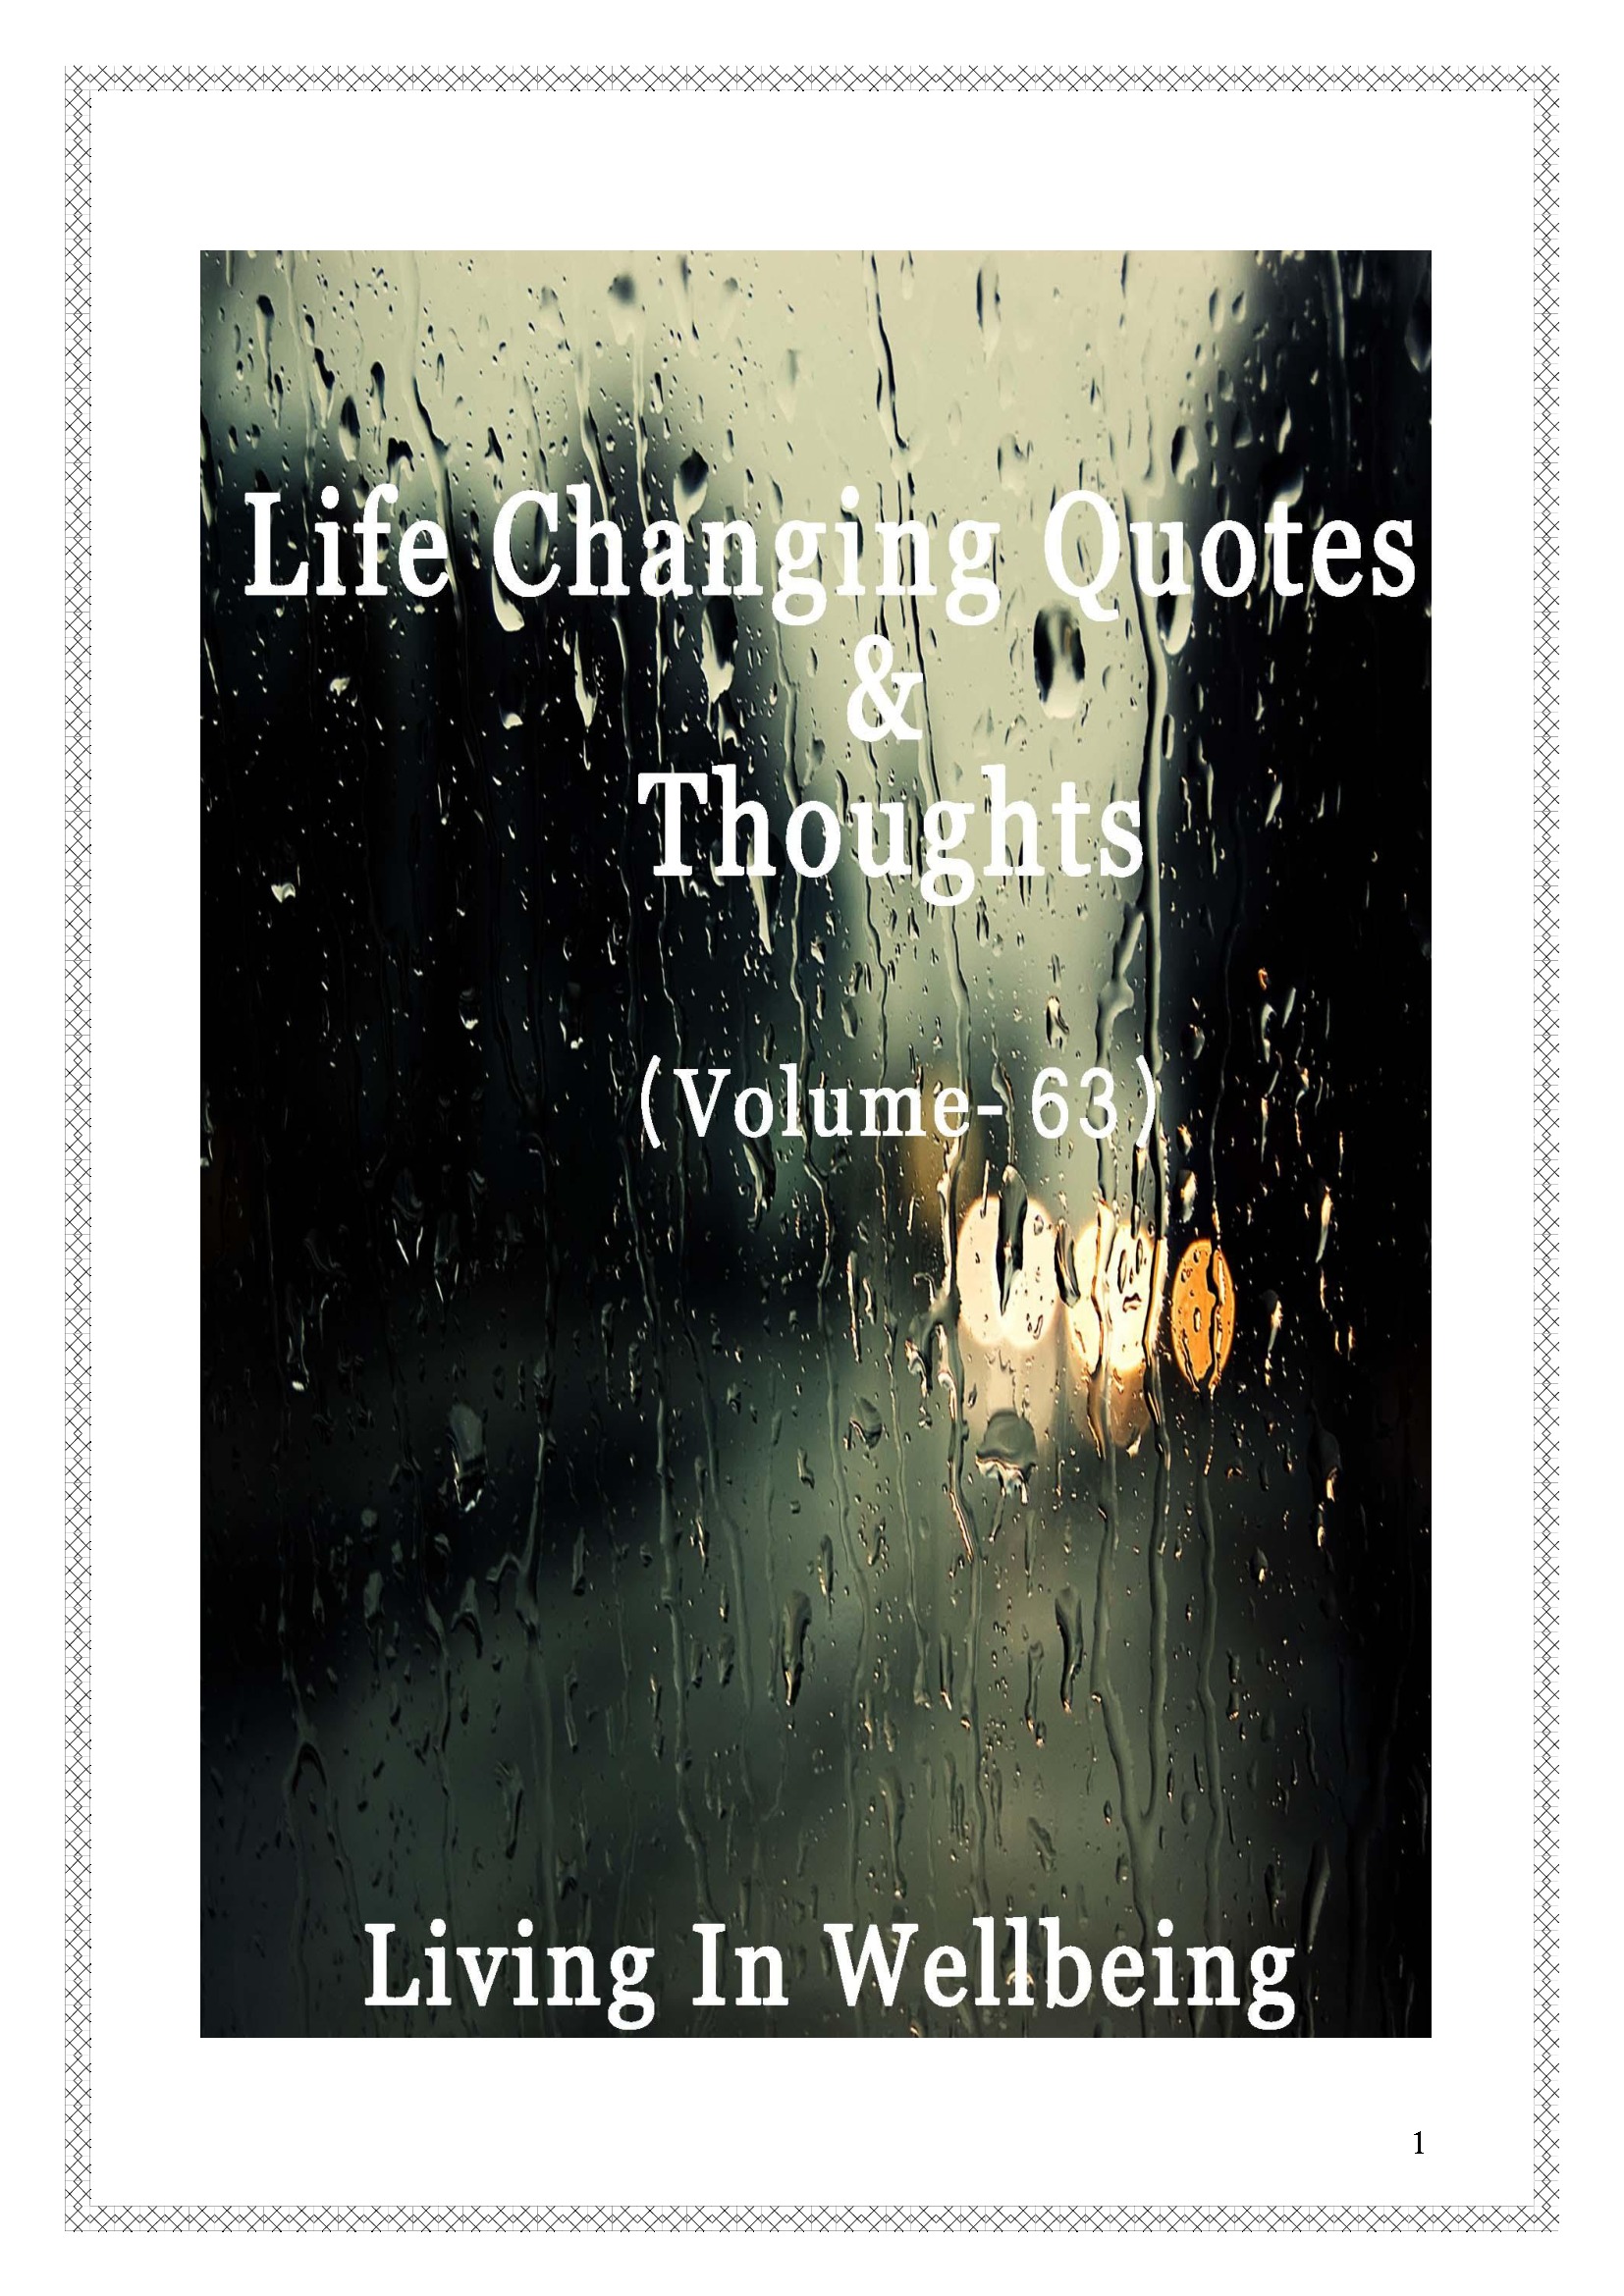 Life Changing Quotes & Thoughts (Volume 63) | Pothi.com